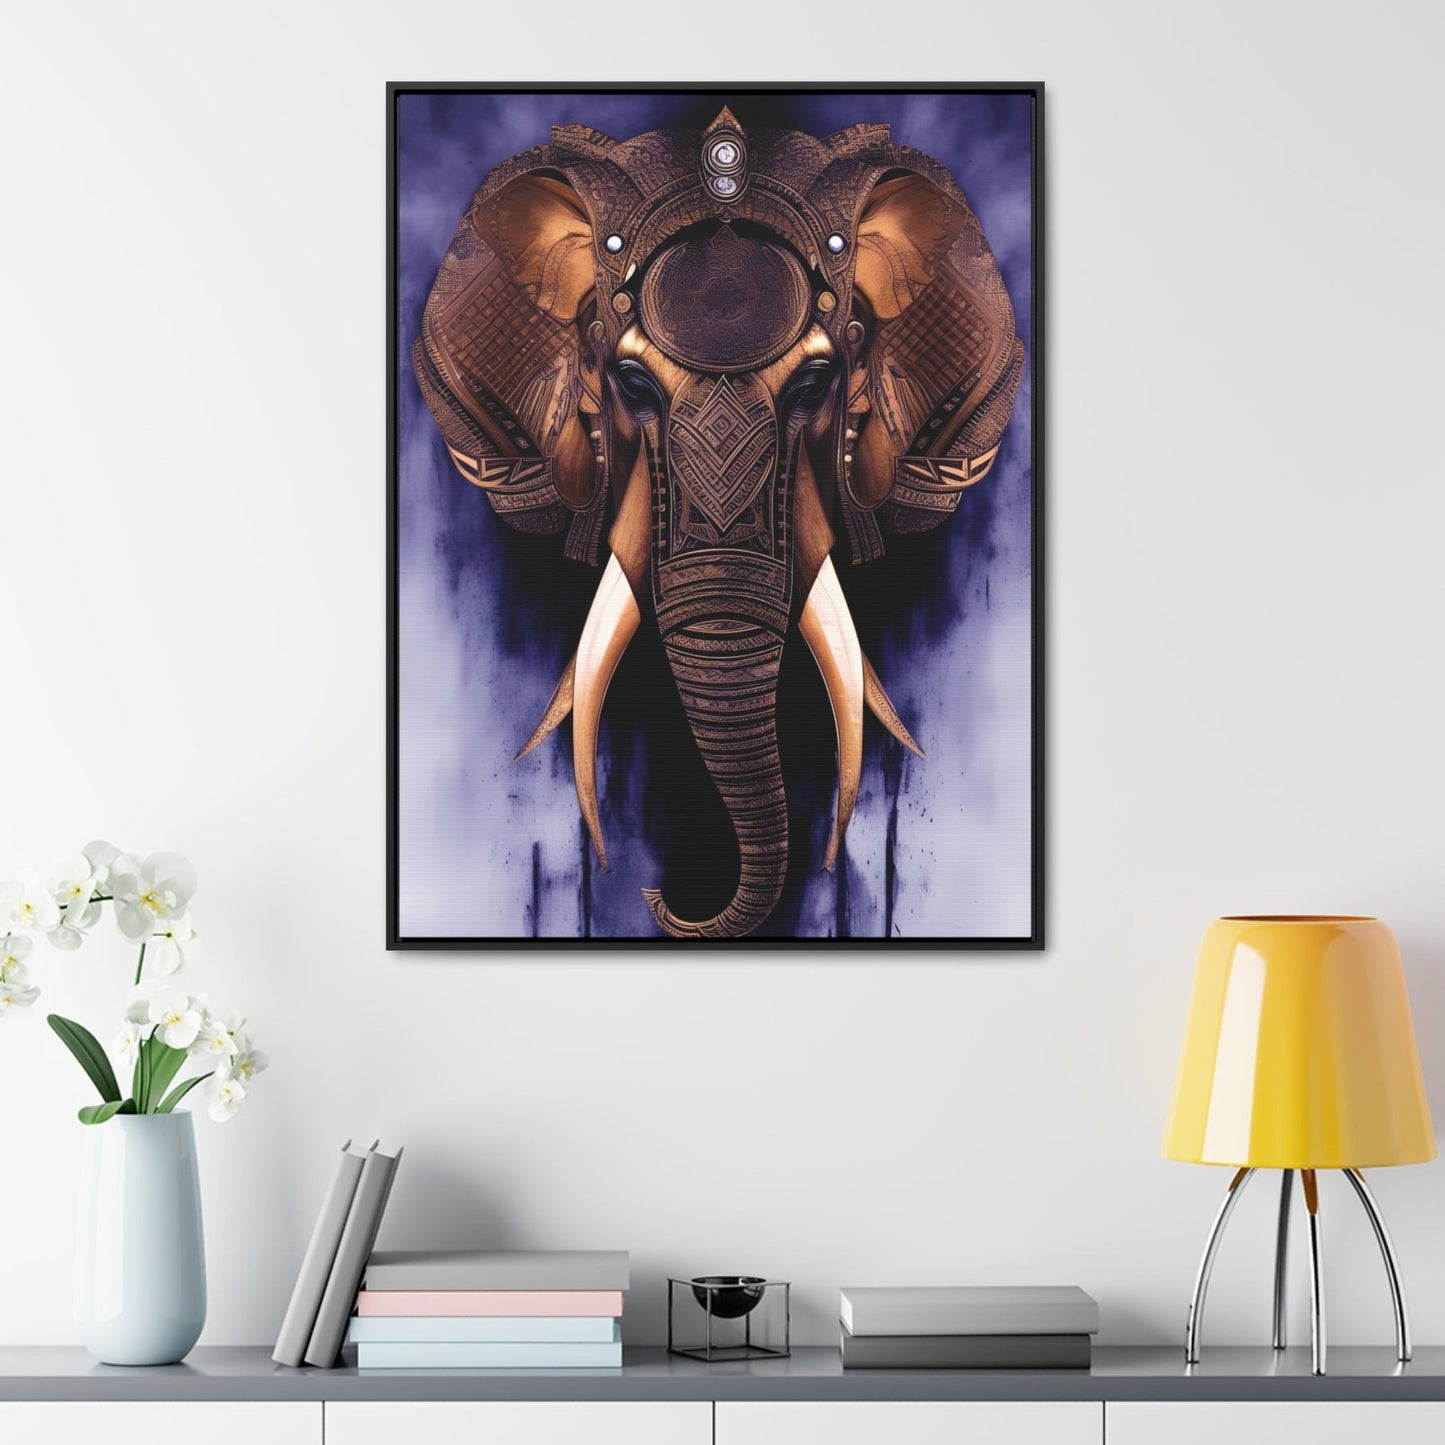 Elephant Themed Modern Wall Art - Tribal Elephant Head on Purple Background Print on Canvas in a Floating Frame hung 30x40